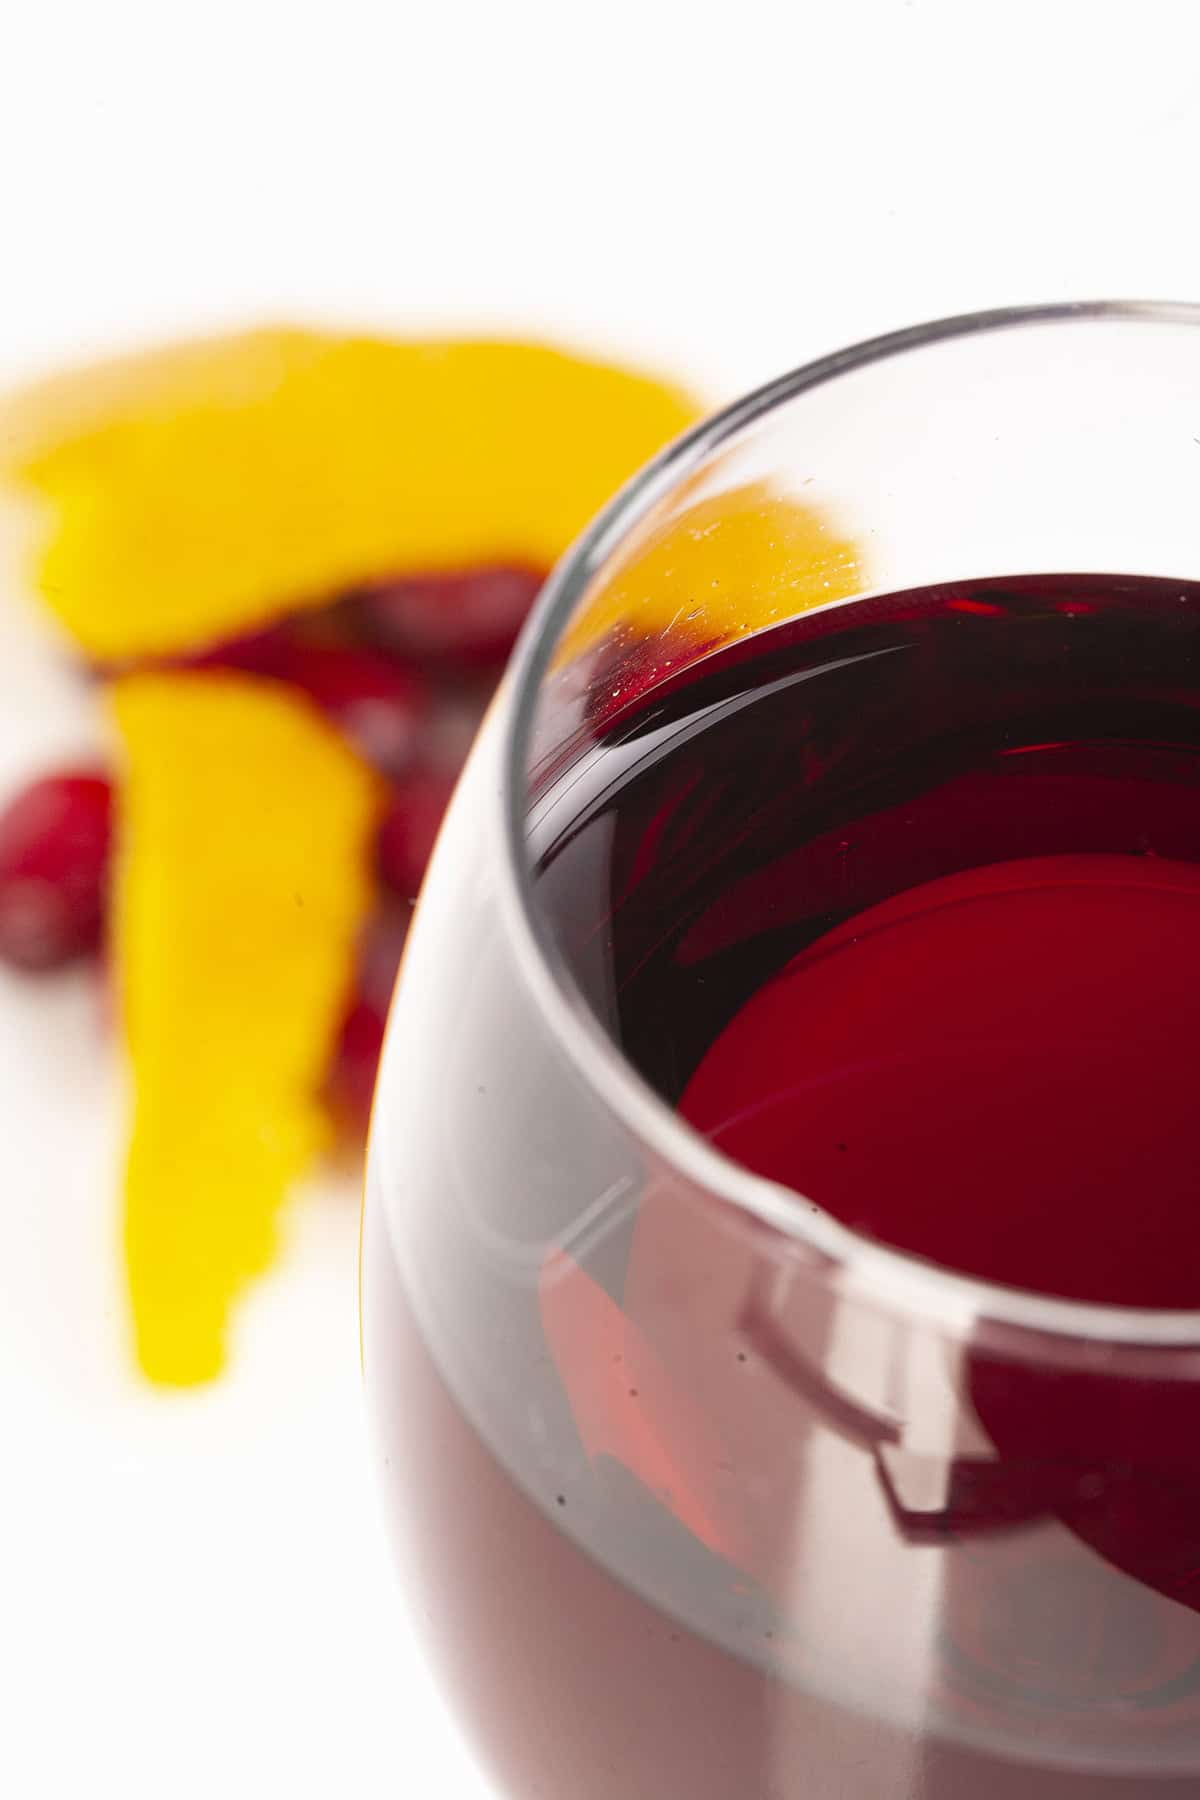 A close up view of a wine glass with with a deep red wine. There are cranberries and orange peels at the base of the glass, against a white background.